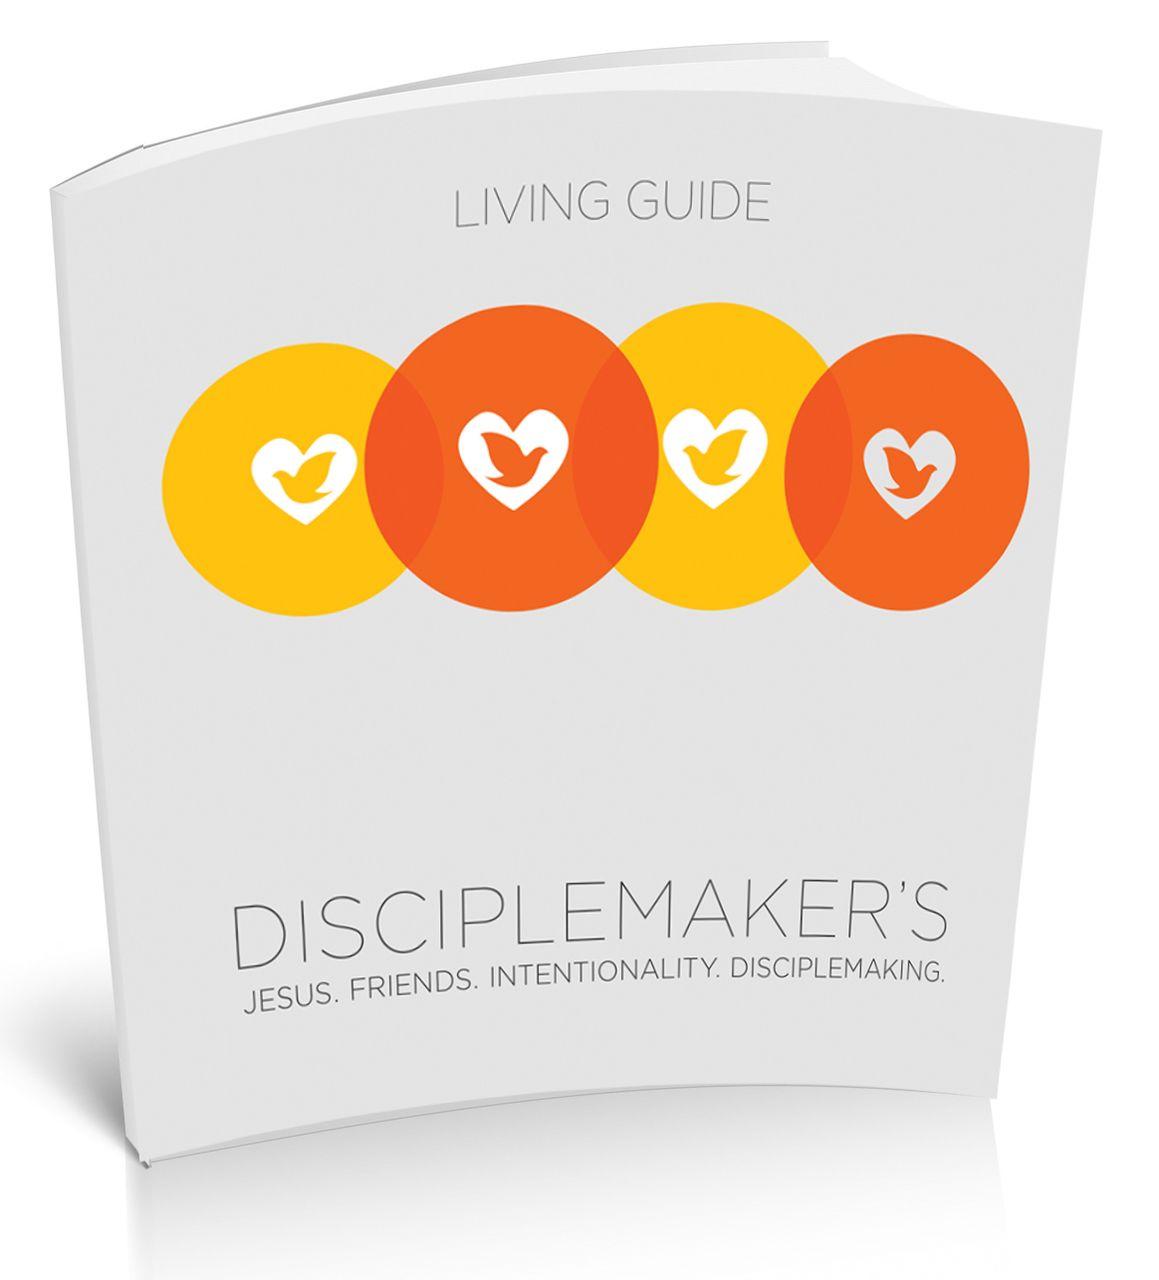 Disciple Maker Logo - Disciplemaker's Living Guide Missionaries Resources & Support